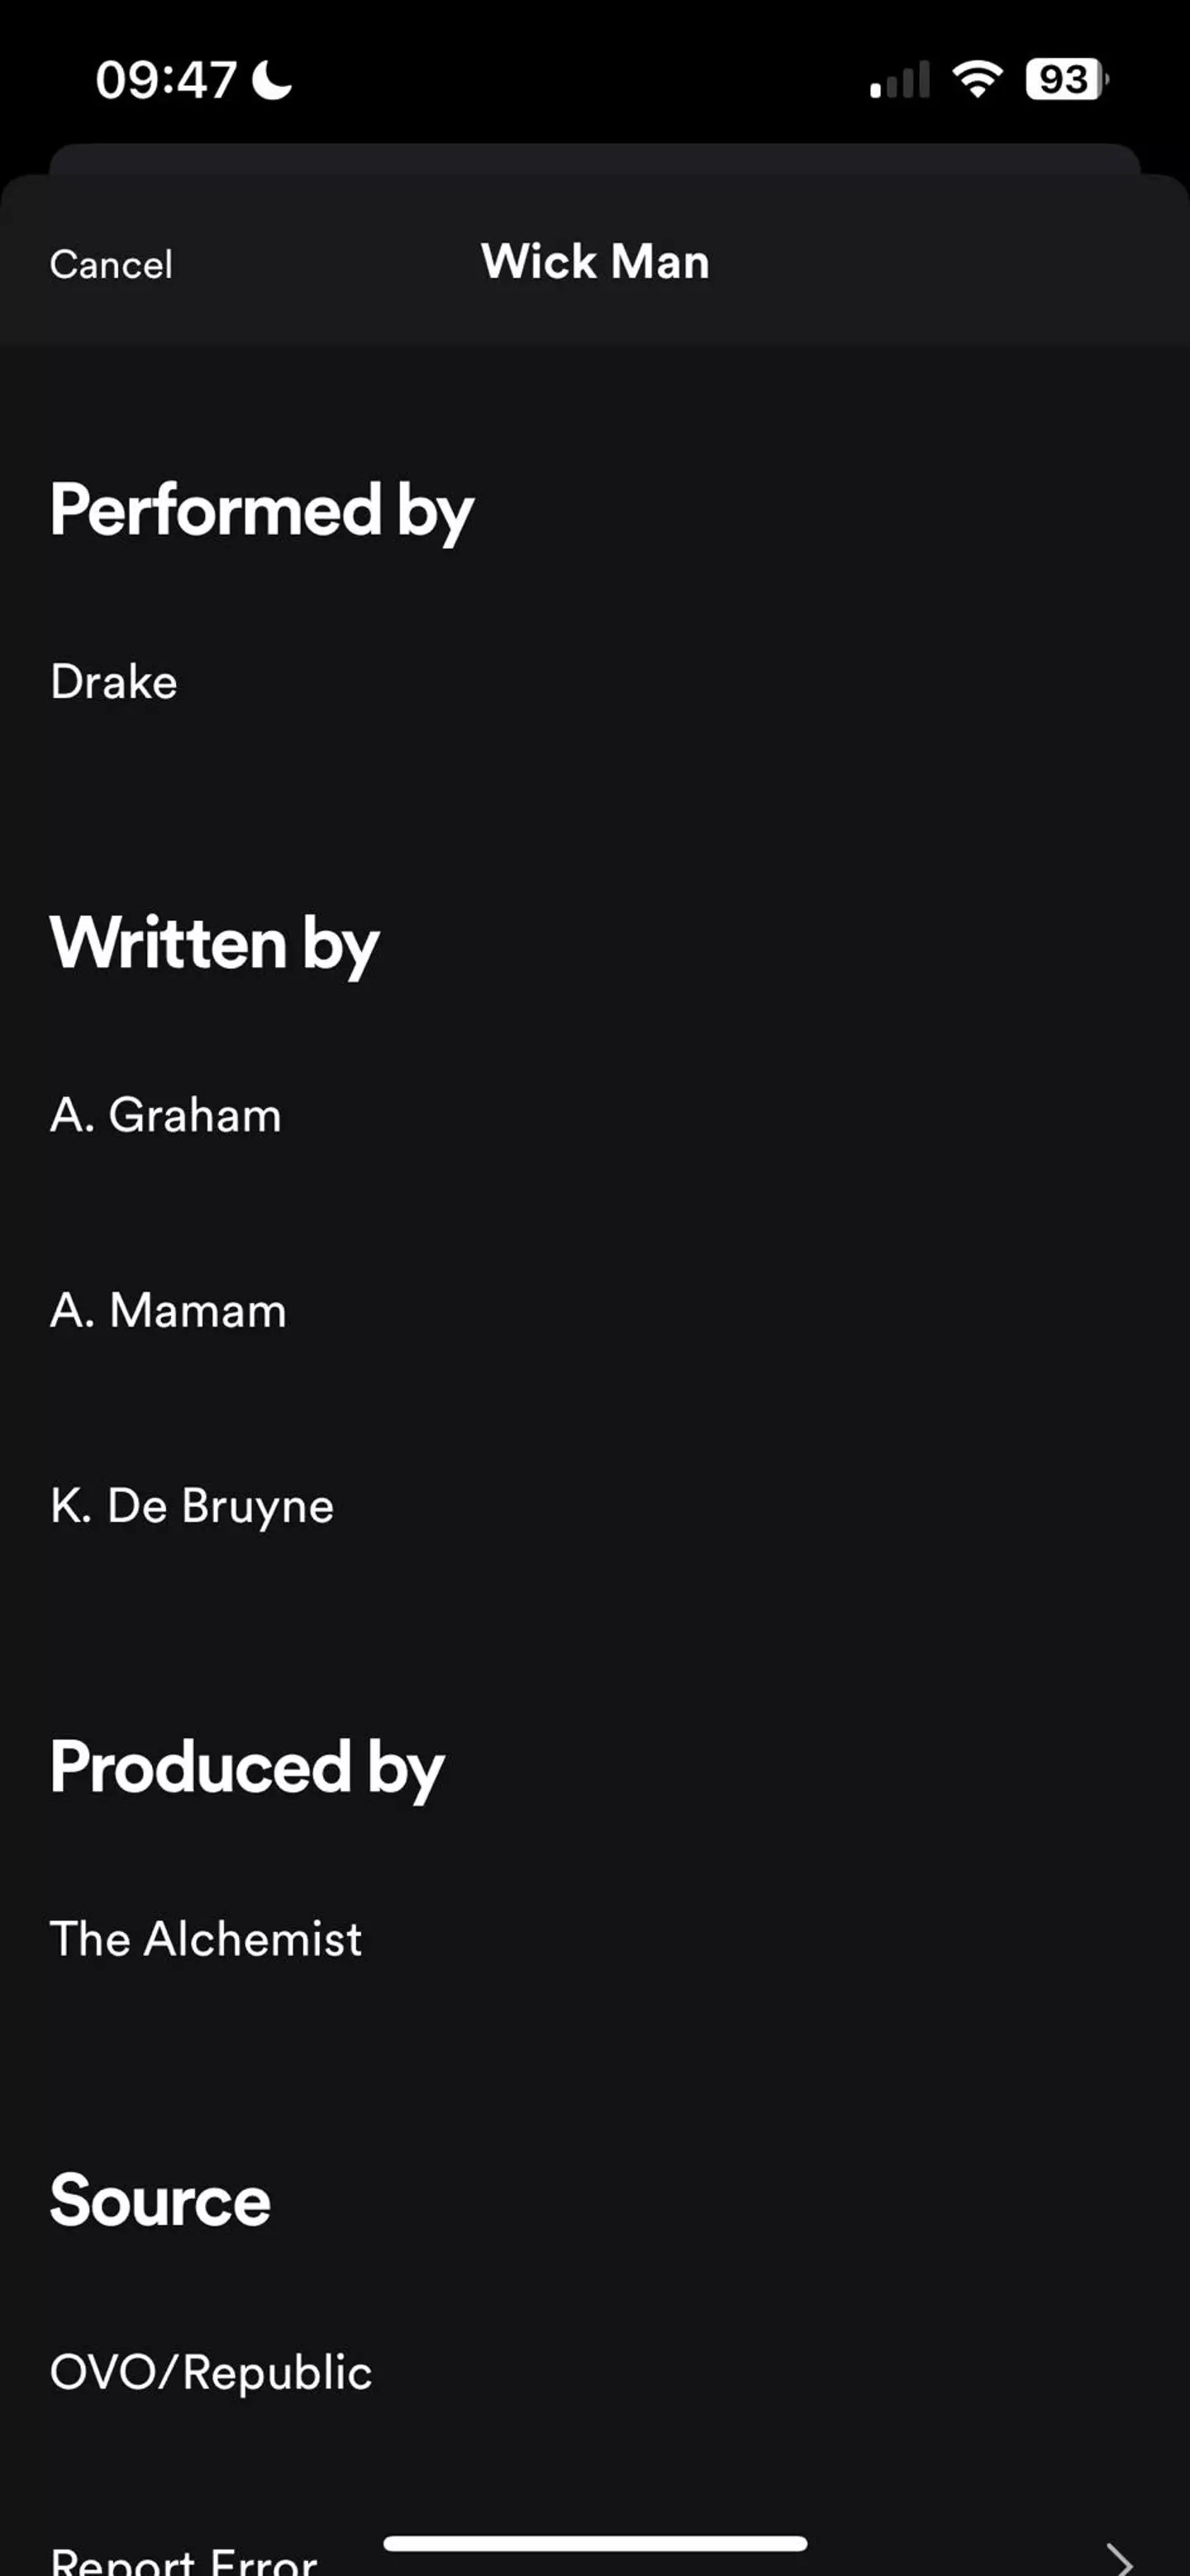 K. De Bruyne is listed as a writer on 'Wick Man'. (Image